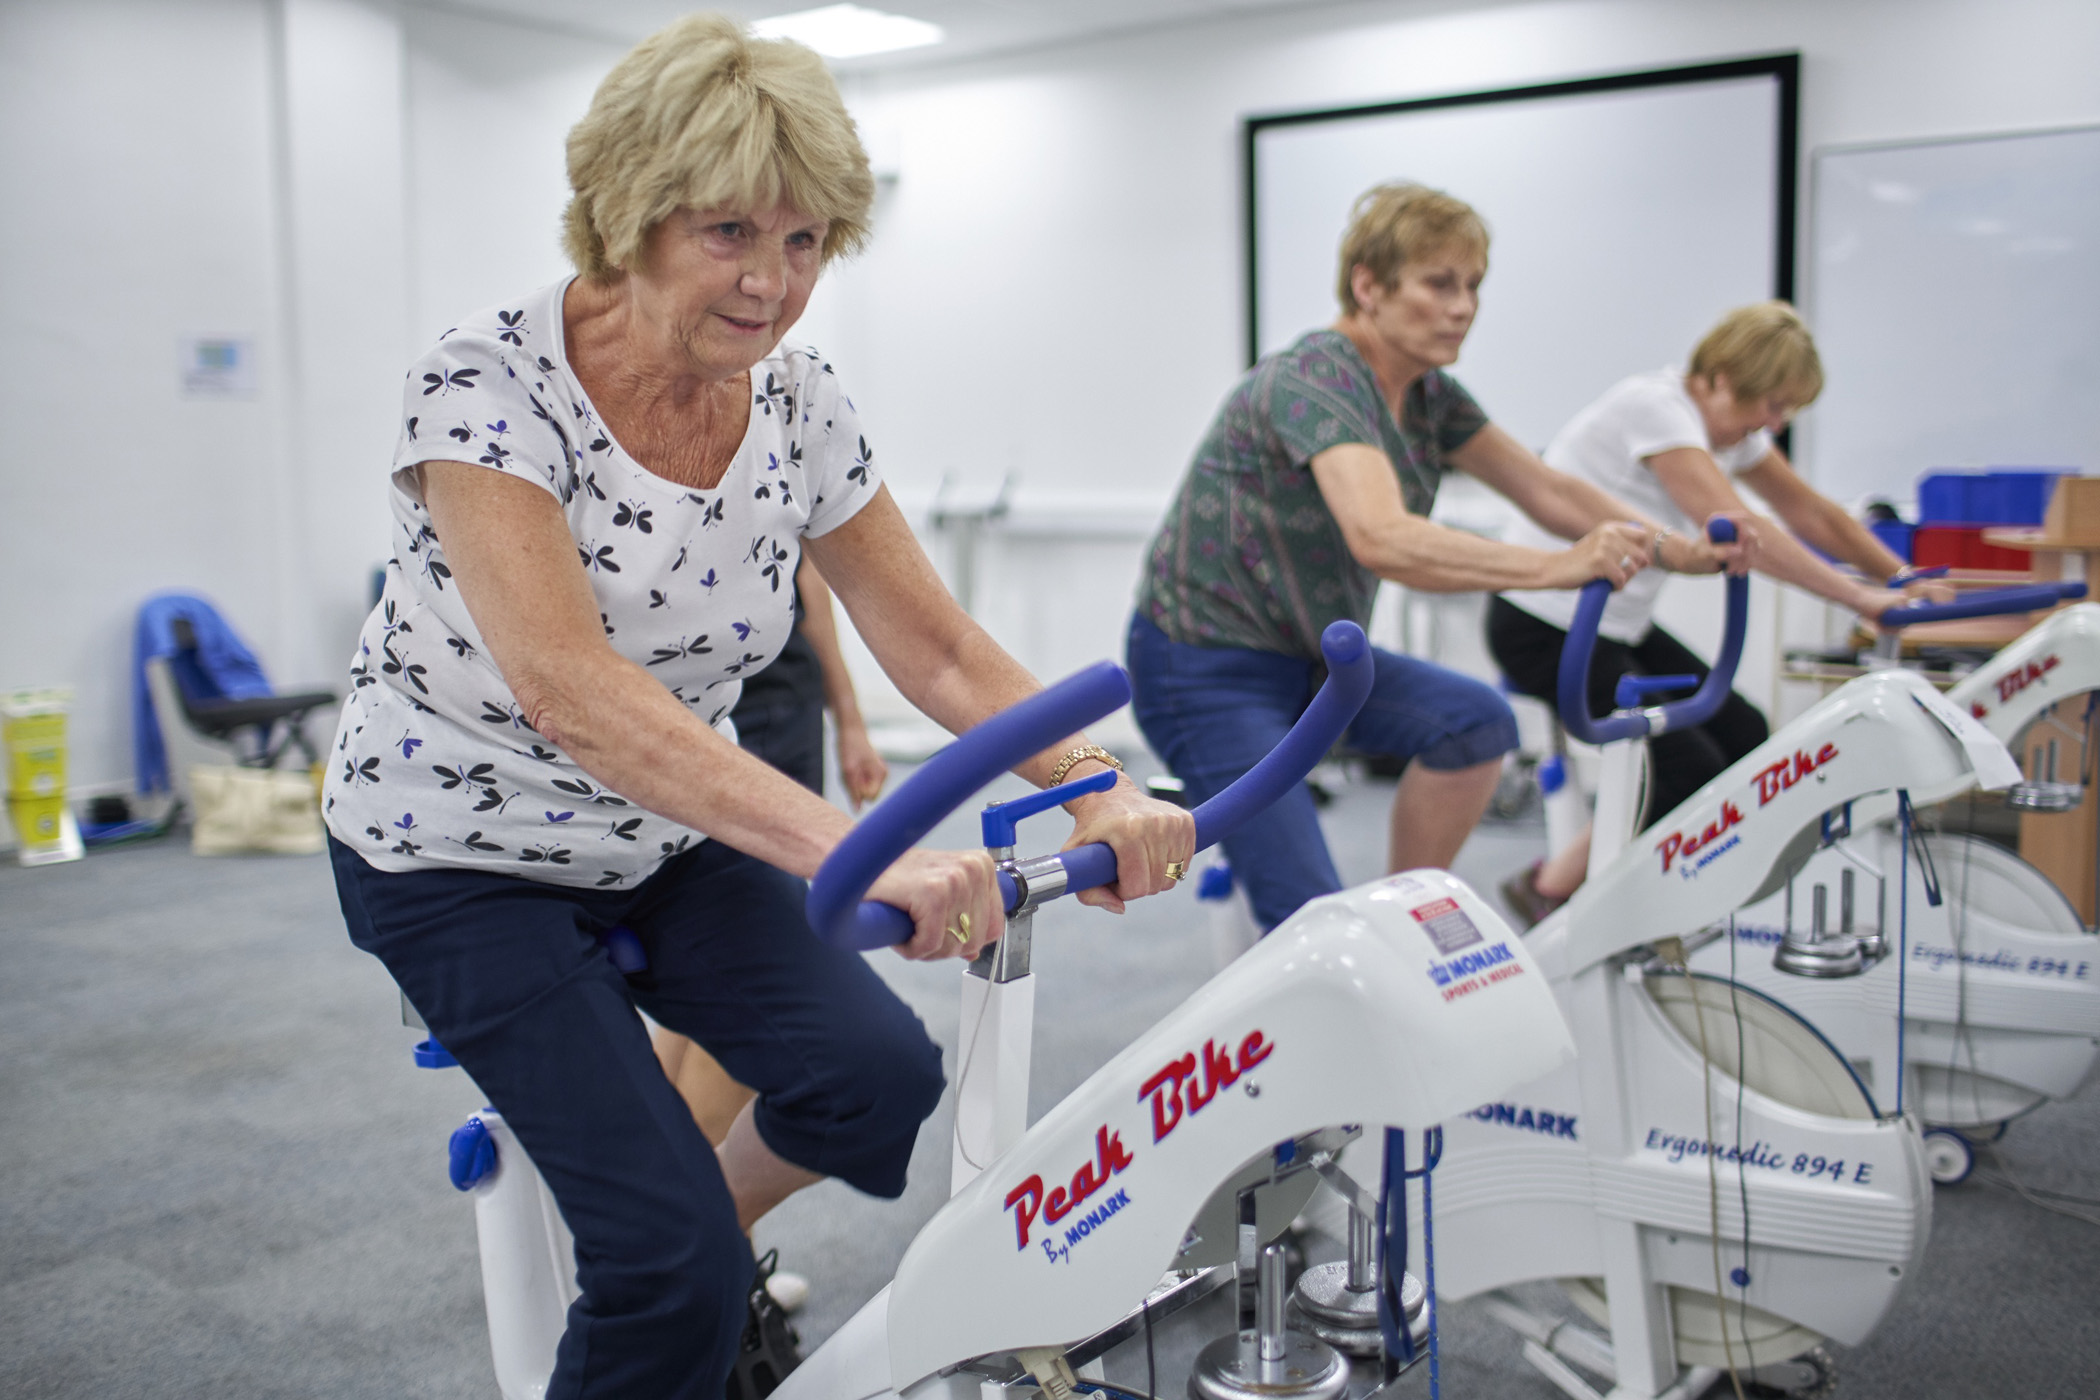 A group of three people on exercise bikes